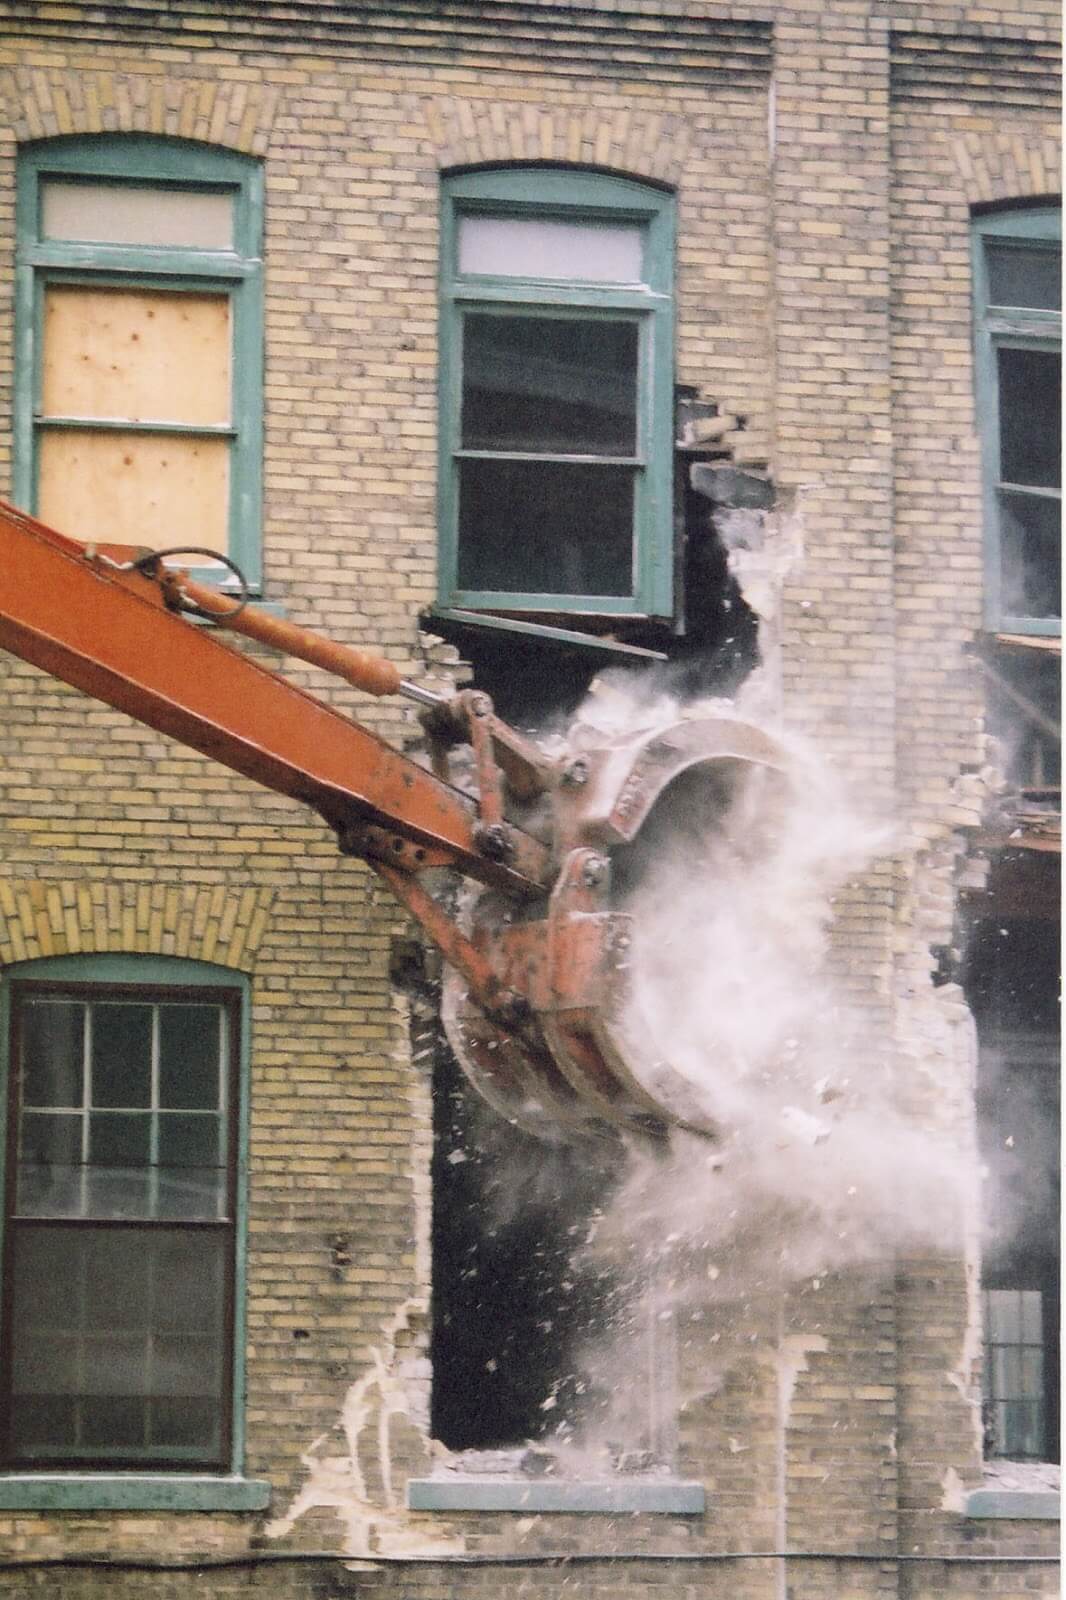 The arm of a bulldozer tearing down a stone building